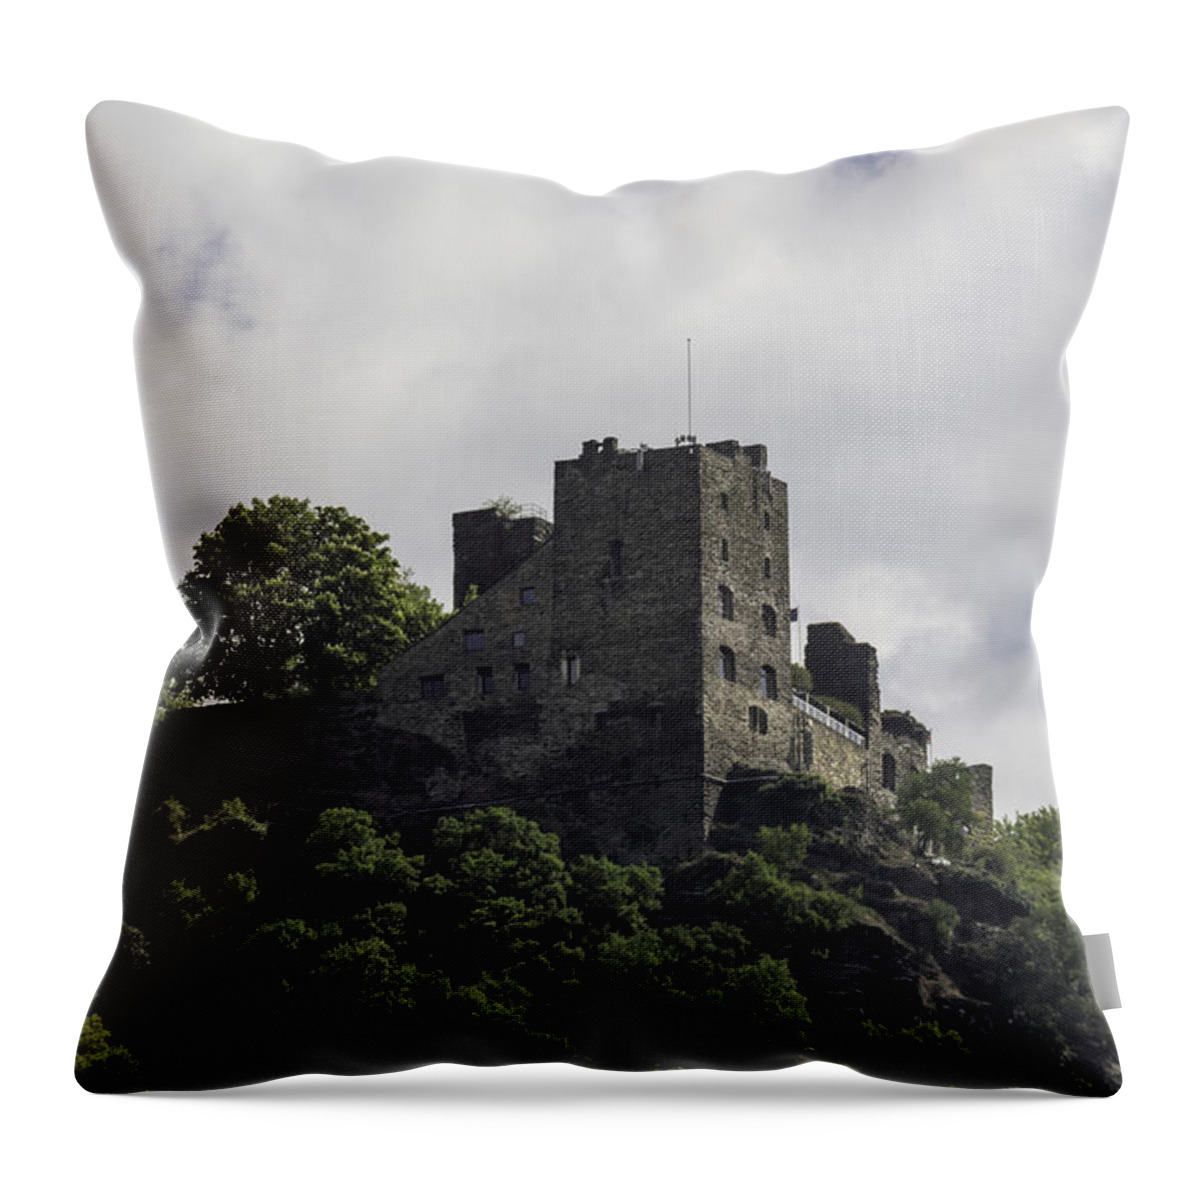 Angry Brother Castles Throw Pillow featuring the photograph Liebenstein Castle 01 by Teresa Mucha